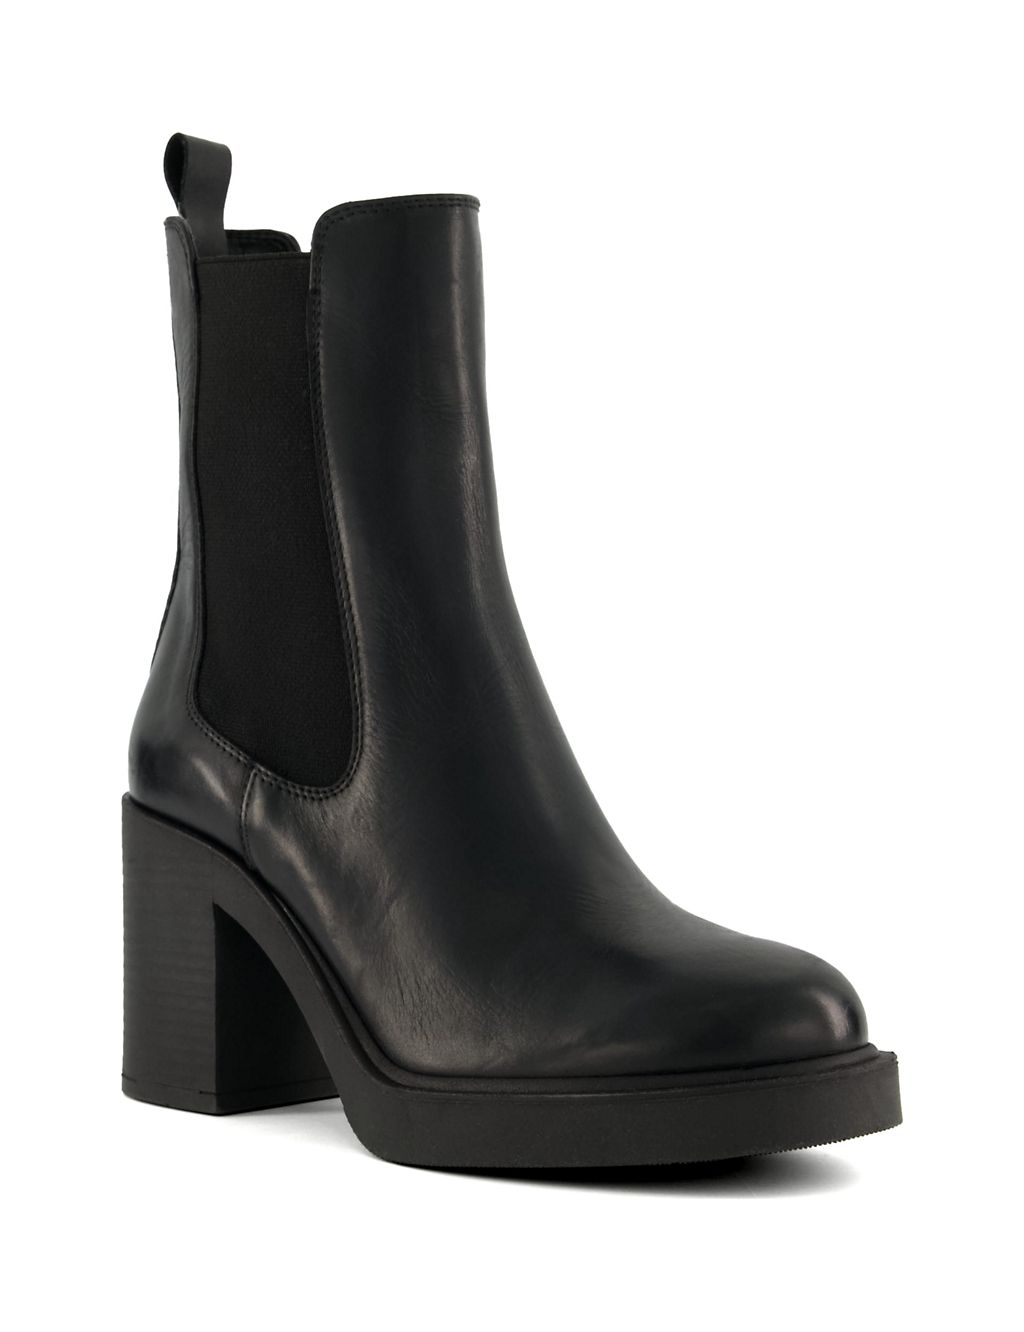 Leather Block Heel Round Toe Ankle Boots | Dune London | M&S